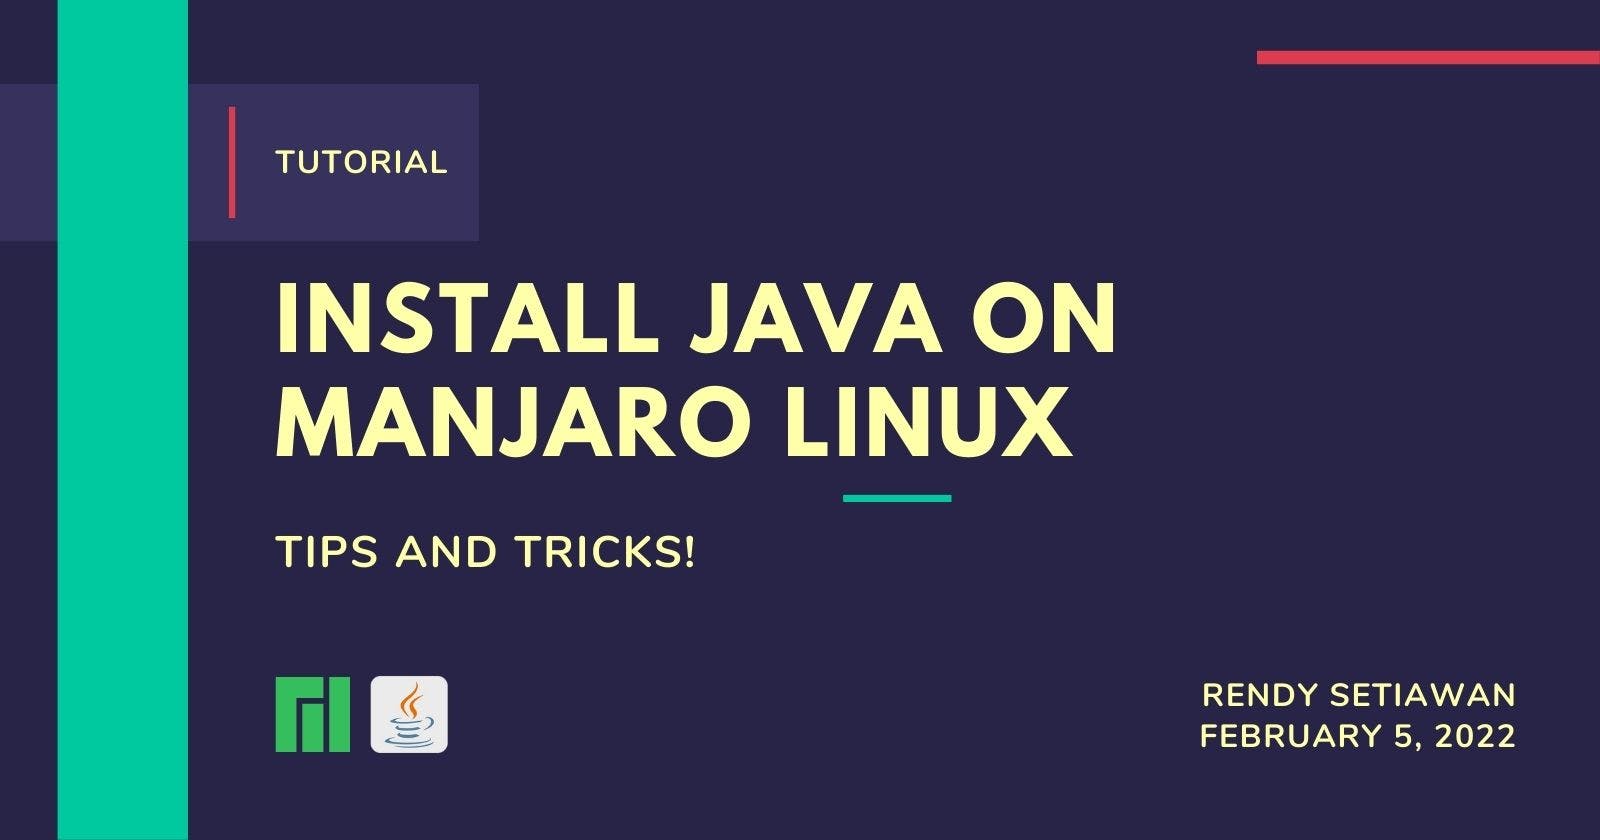 How to Install Java on Manjaro Linux